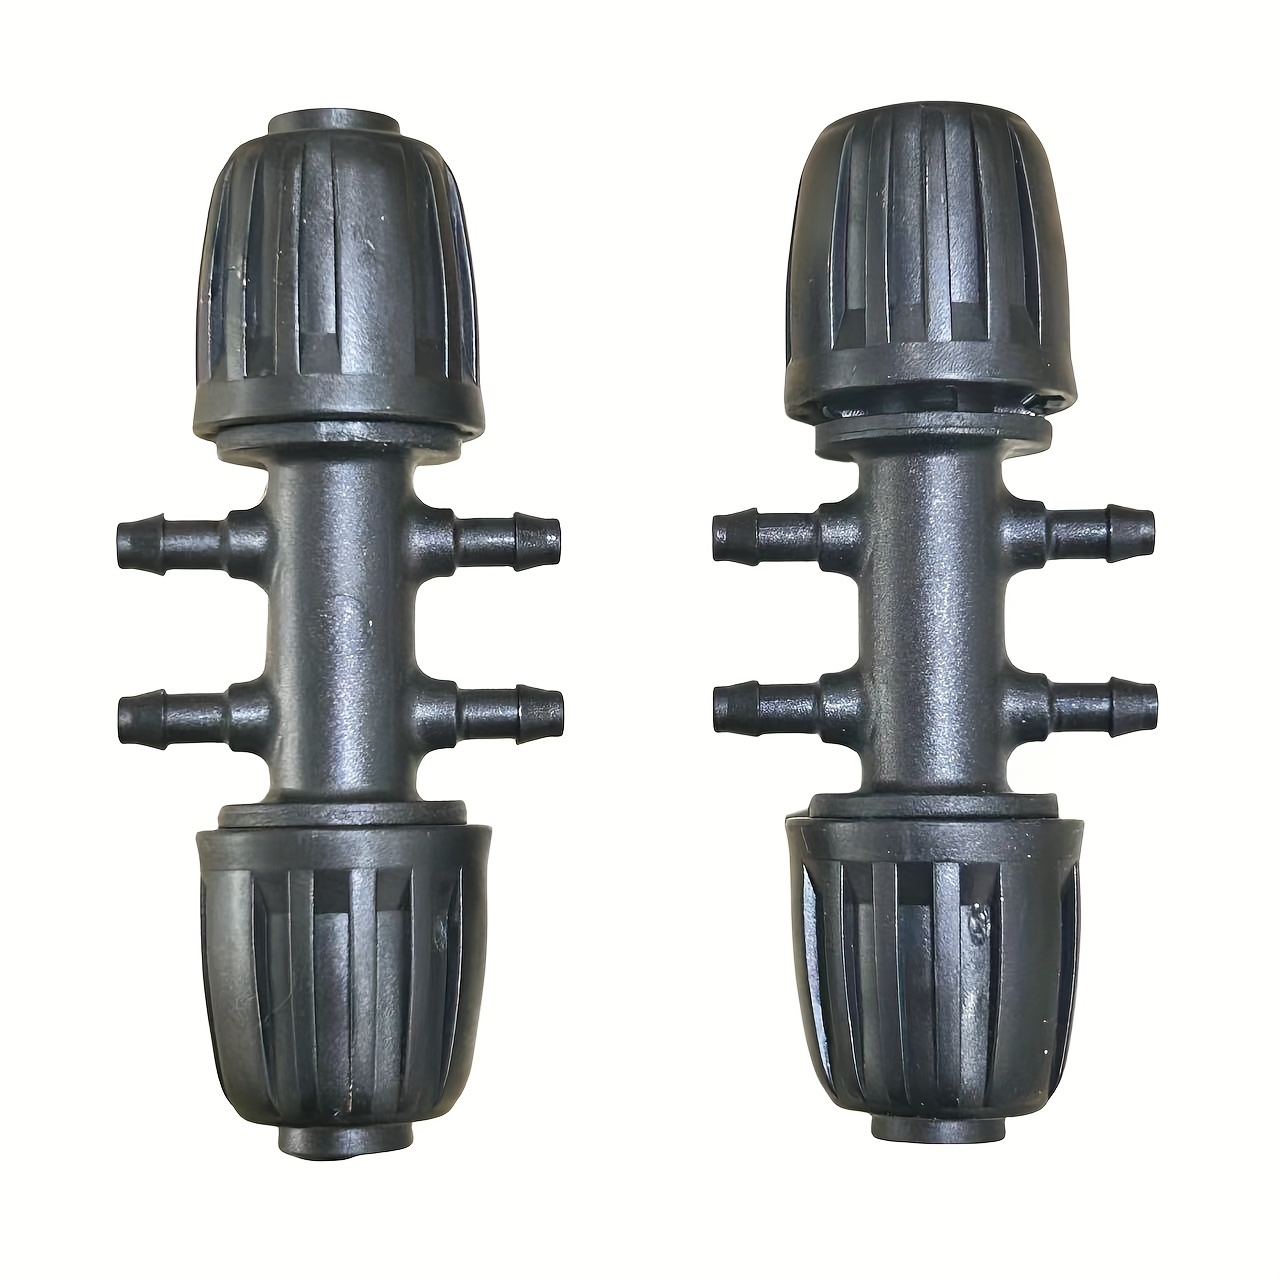 

2pcs, Six-way Adapter Barbed Tee 1/2 Inch To 1/4 Inch Irrigation Tube Anti-drop Fitting ( 13mm Id/ 4mm Id), 16mm Pe Pipe Lock Female Connector To 47mm Pipe Variable Diameter